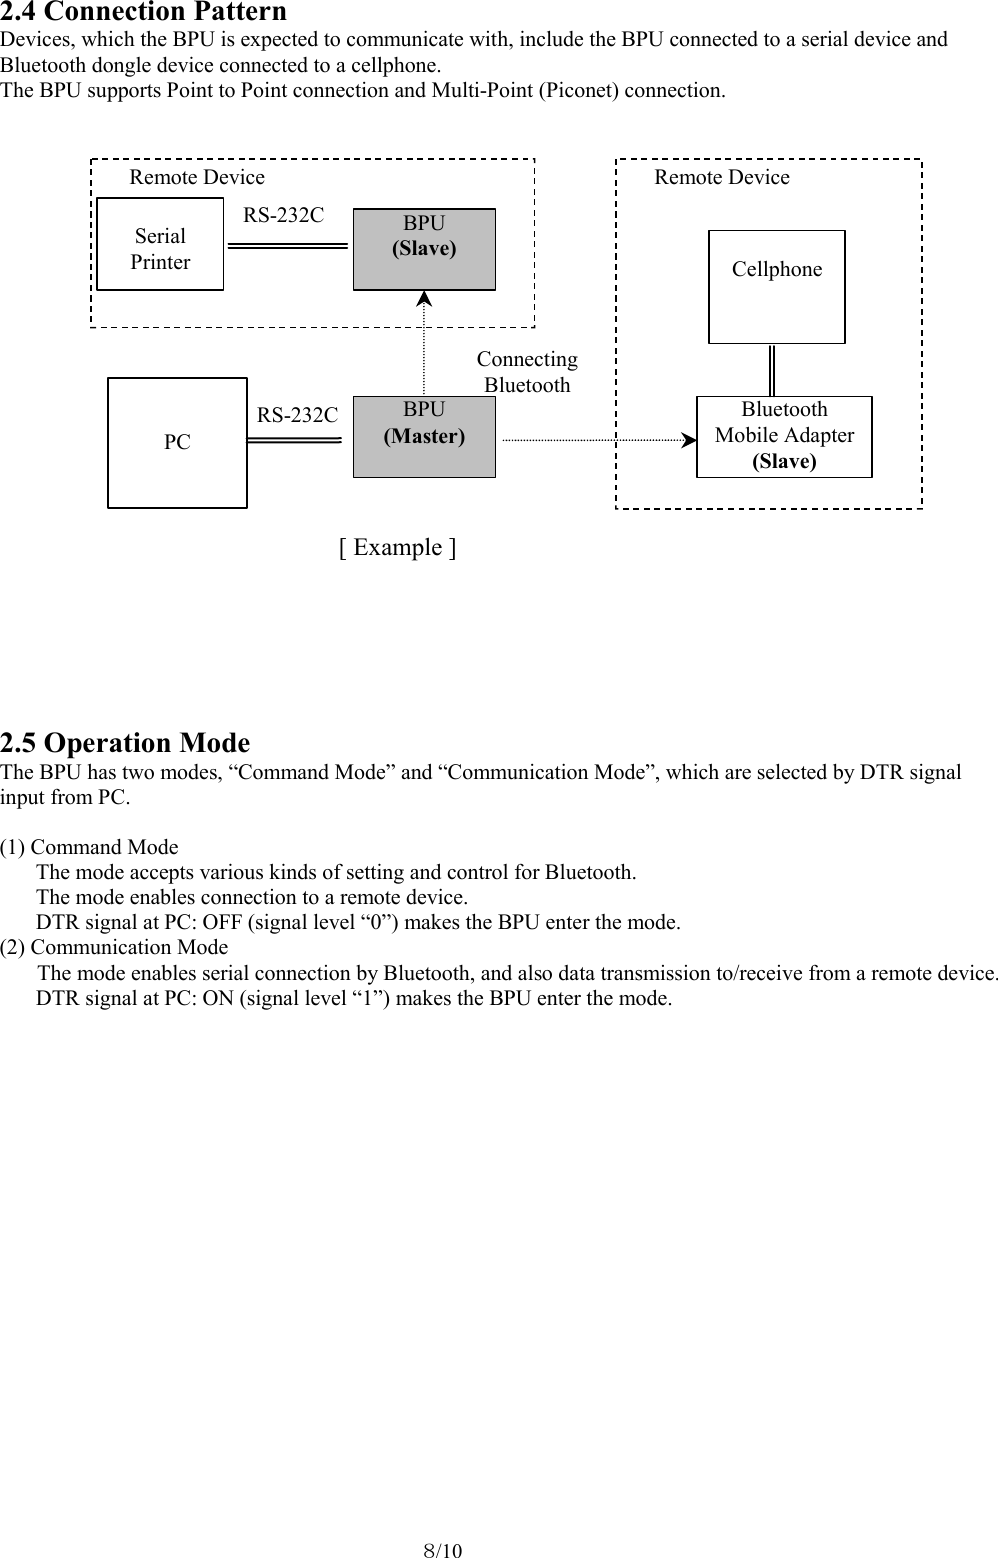    ８/10  2.4 Connection Pattern Devices, which the BPU is expected to communicate with, include the BPU connected to a serial device and Bluetooth dongle device connected to a cellphone. The BPU supports Point to Point connection and Multi-Point (Piconet) connection.     Serial Printer BPU (Slave) RS-232C Connecting Bluetooth Bluetooth  Mobile Adapter (Slave) Remote Device  Remote Device   PC  Cellphone BPU (Master) RS-232C          2.5 Operation Mode The BPU has two modes, “Command Mode” and “Communication Mode”, which are selected by DTR signal input from PC.  (1) Command Mode The mode accepts various kinds of setting and control for Bluetooth. The mode enables connection to a remote device. DTR signal at PC: OFF (signal level “0”) makes the BPU enter the mode. (2) Communication Mode The mode enables serial connection by Bluetooth, and also data transmission to/receive from a remote device. DTR signal at PC: ON (signal level “1”) makes the BPU enter the mode. [ Example ] 